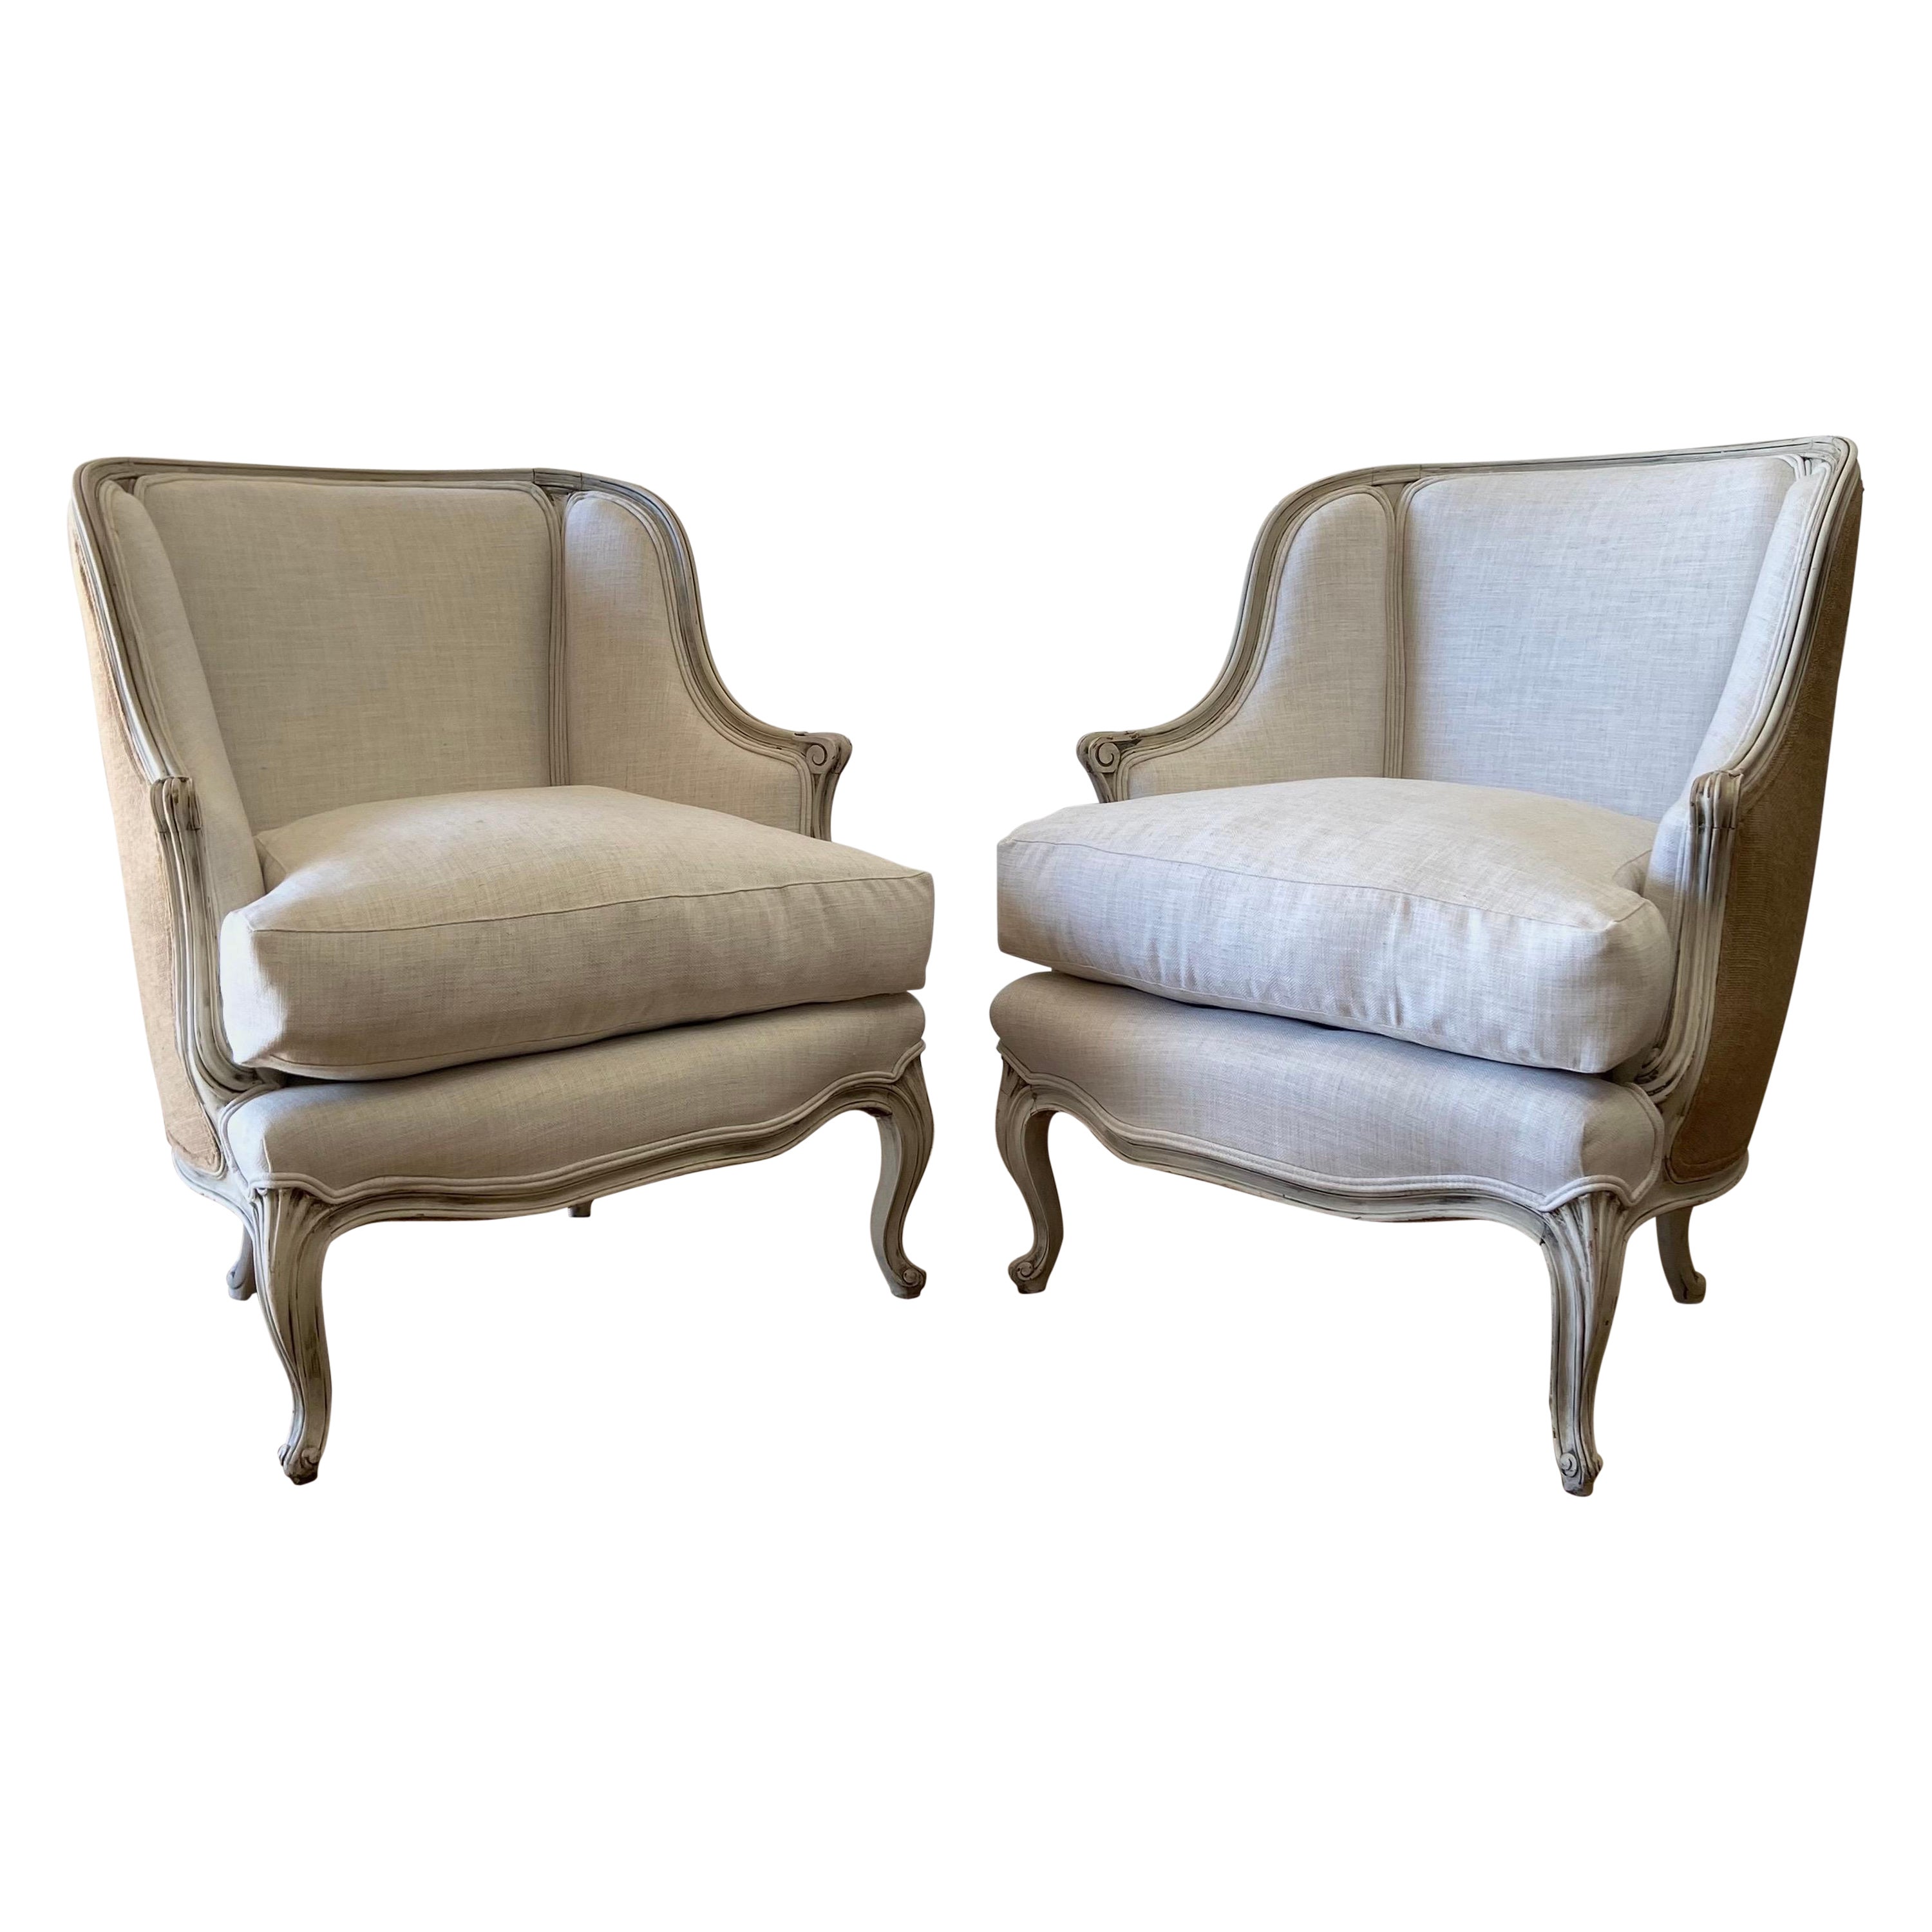 Pair of 20th Century French Louis XV Style Bergere Club Chairs